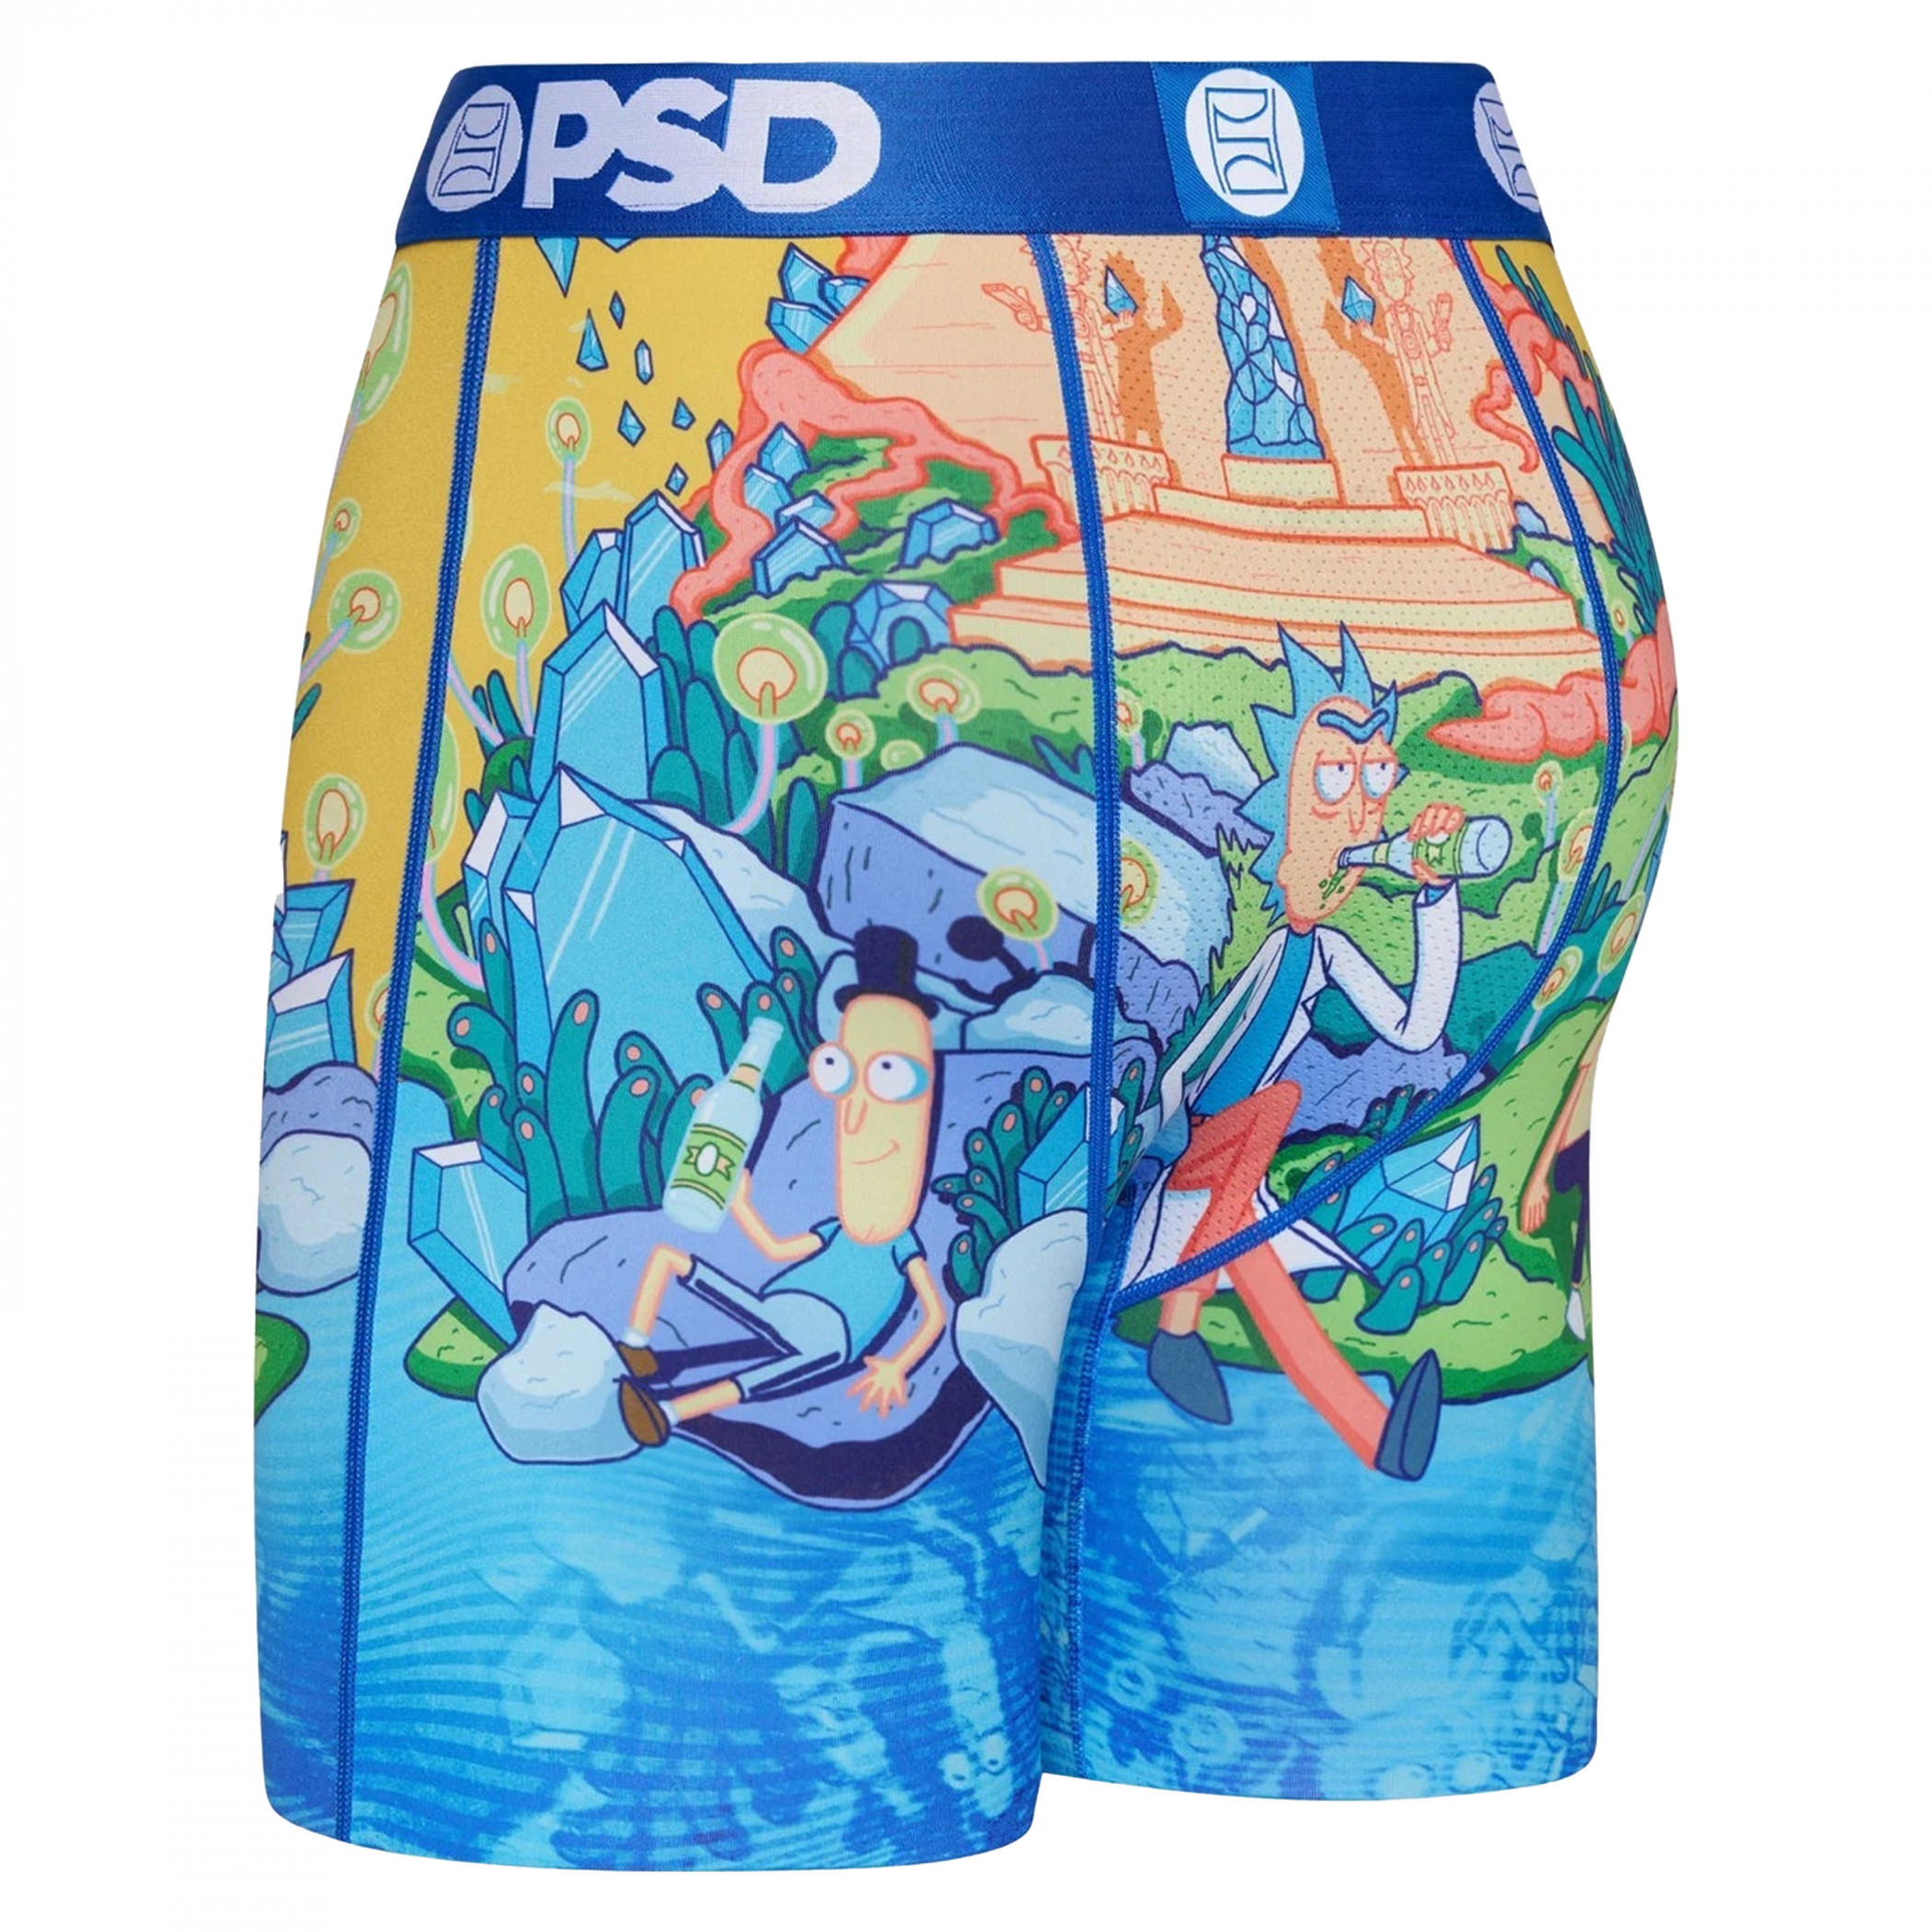 Rick And Morty Hangin' Around PSD Boxer Briefs-Large (36-38) 